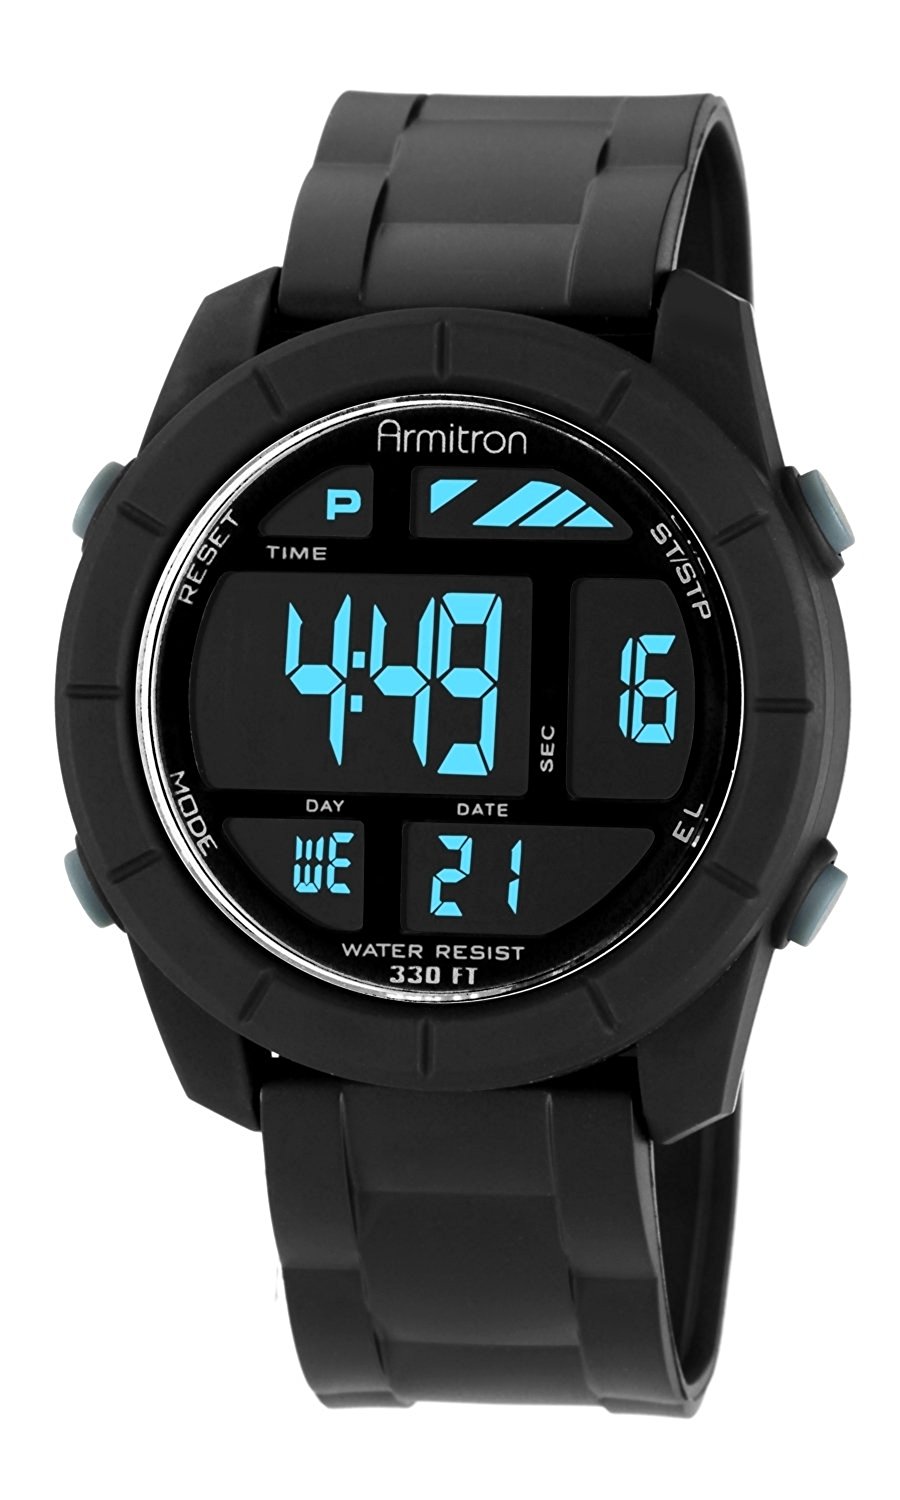 sports-watch-great-gift-idea-for-teen-or-preteen